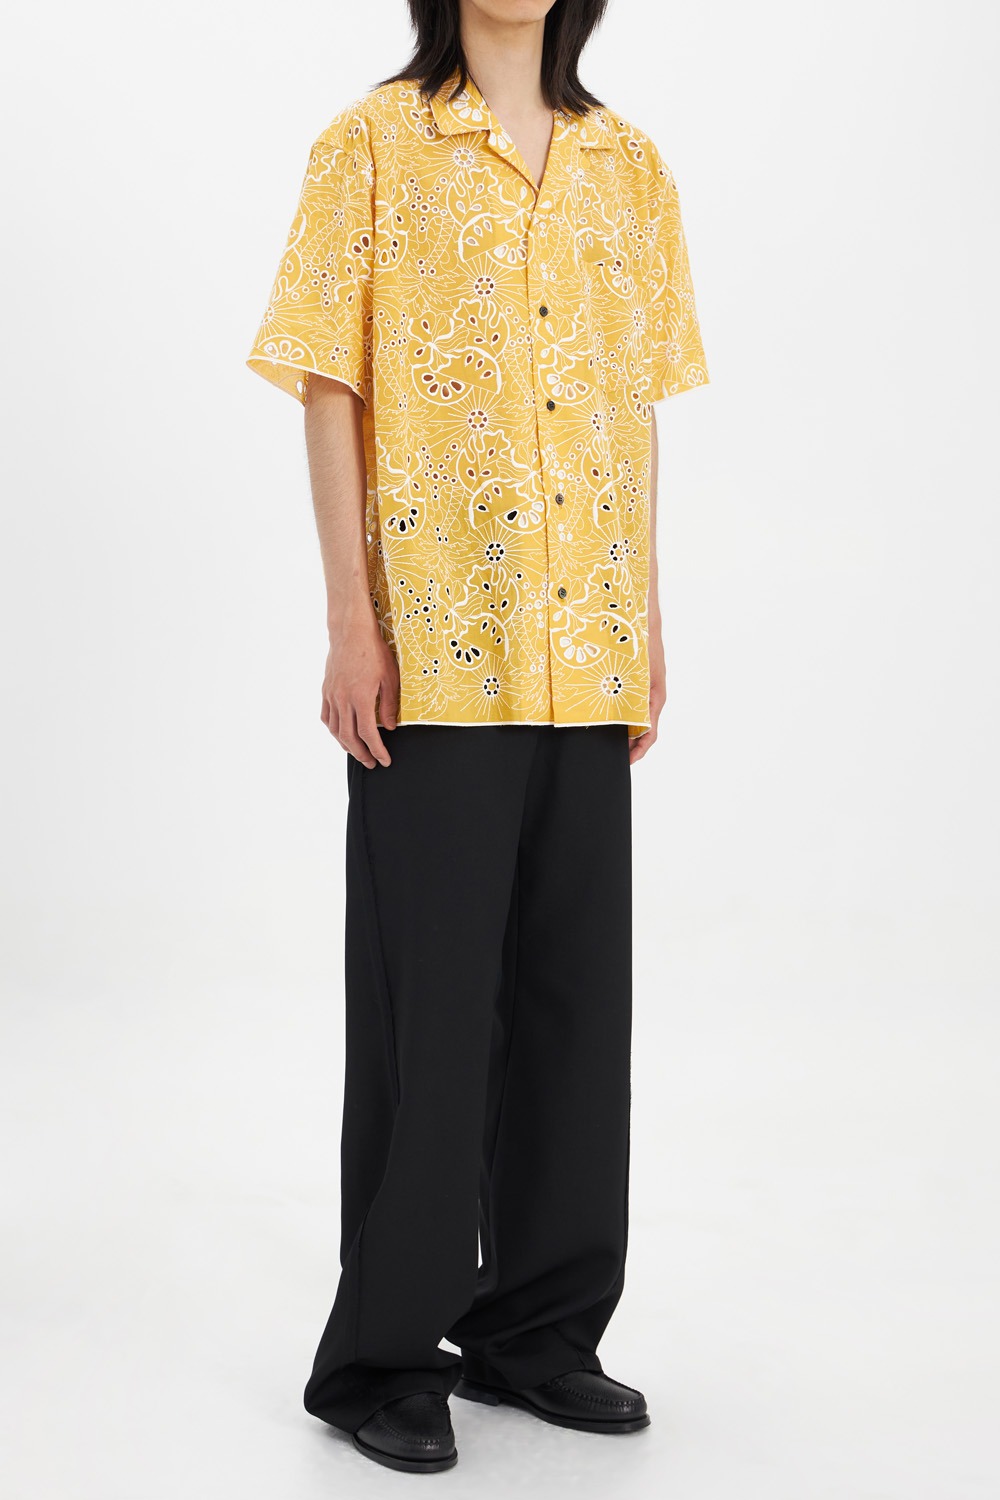 Cotton Embroidery S/S Shirt_Yellow